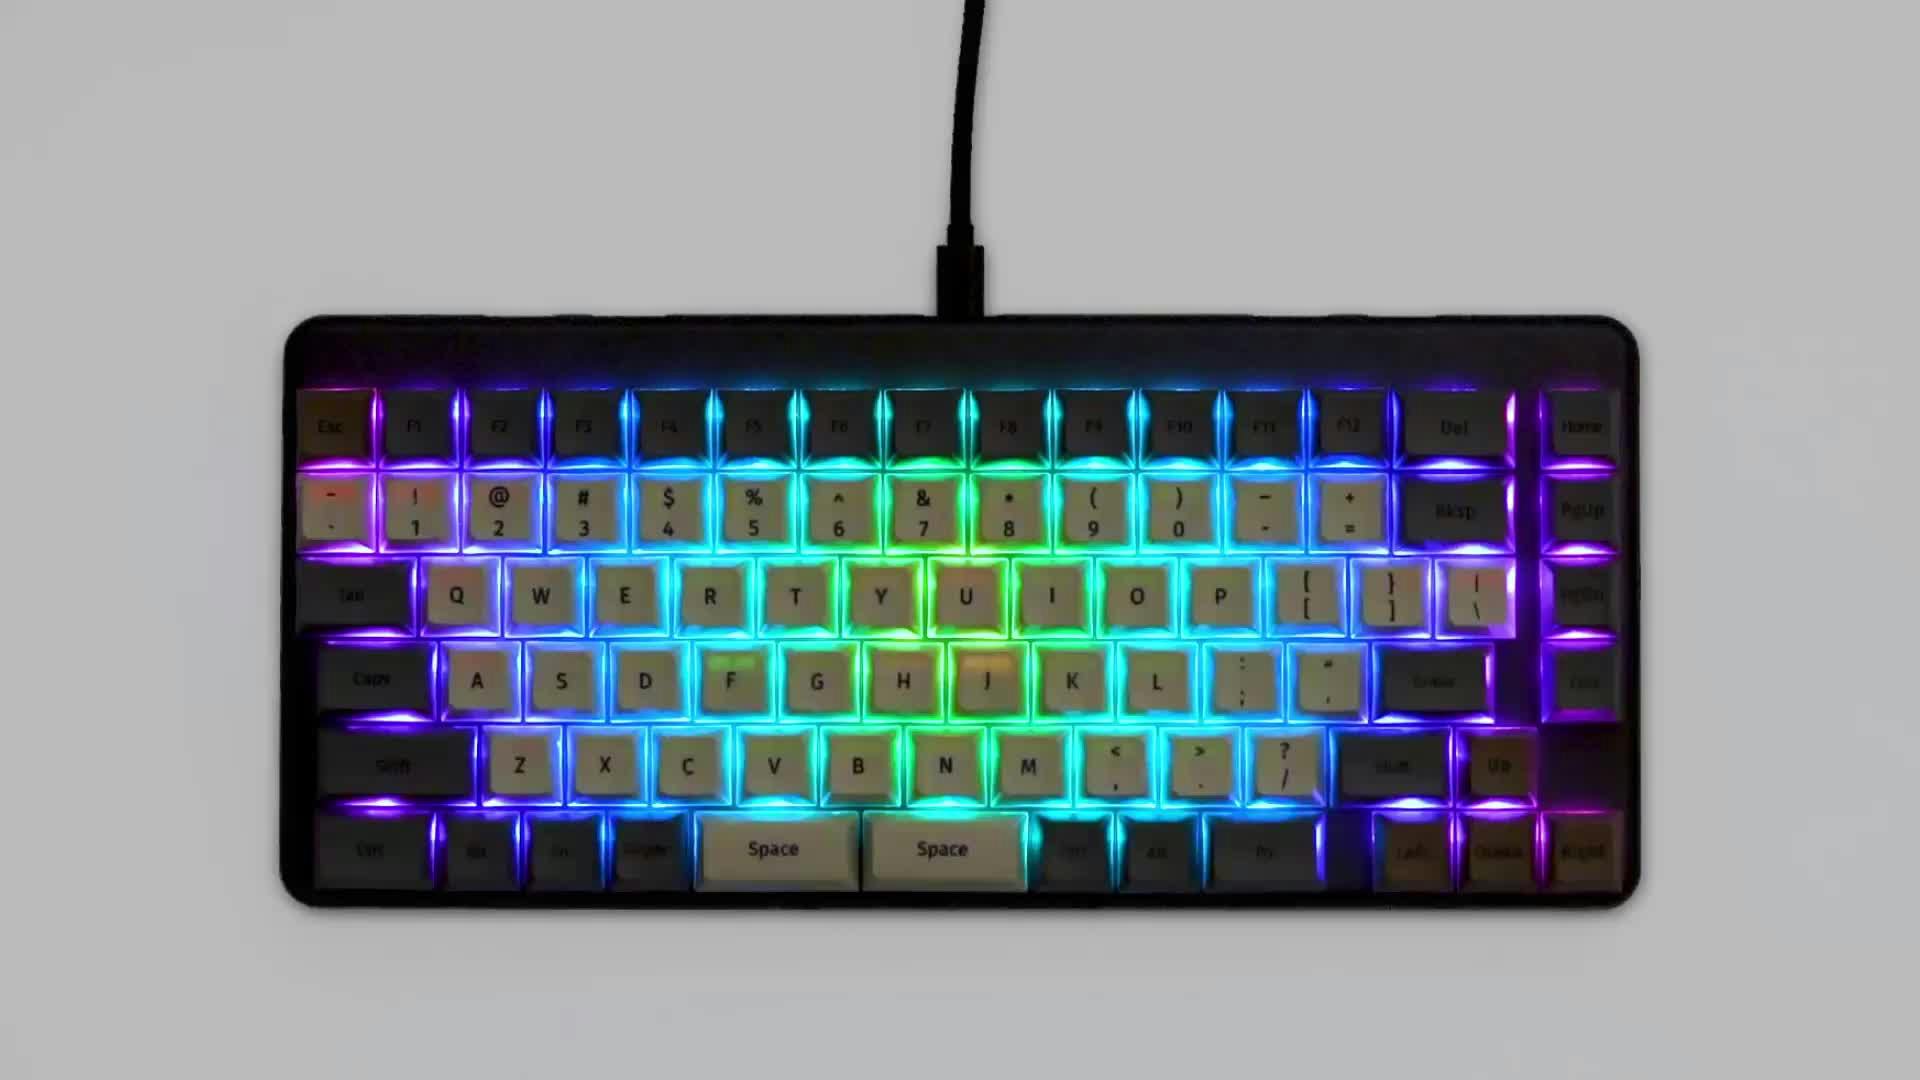 The Launch keyboard with the Event Horizon LED pattern.